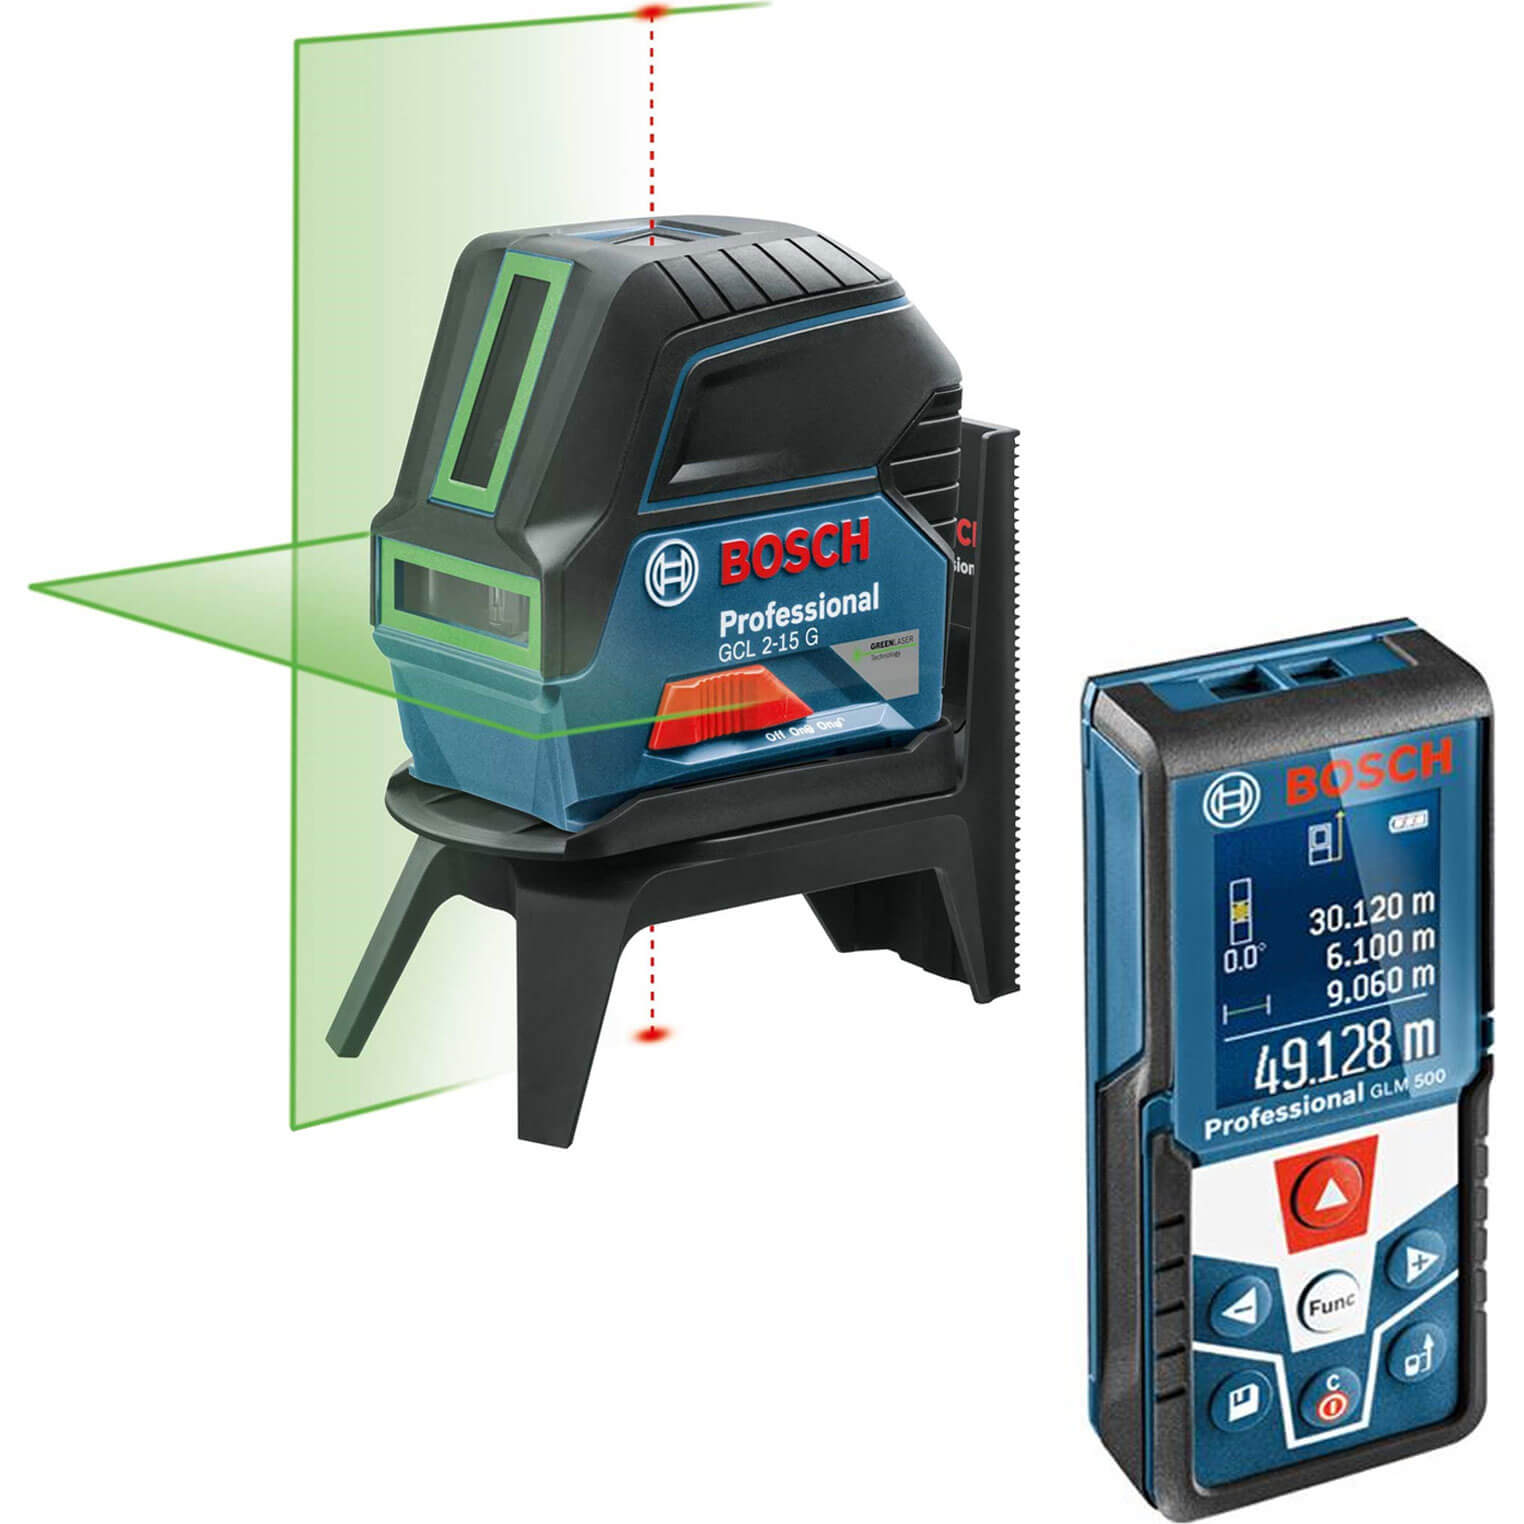 Bosch GCL 2-15 Green Self Levelling Laser level and GLM500 Laser Measure Kit